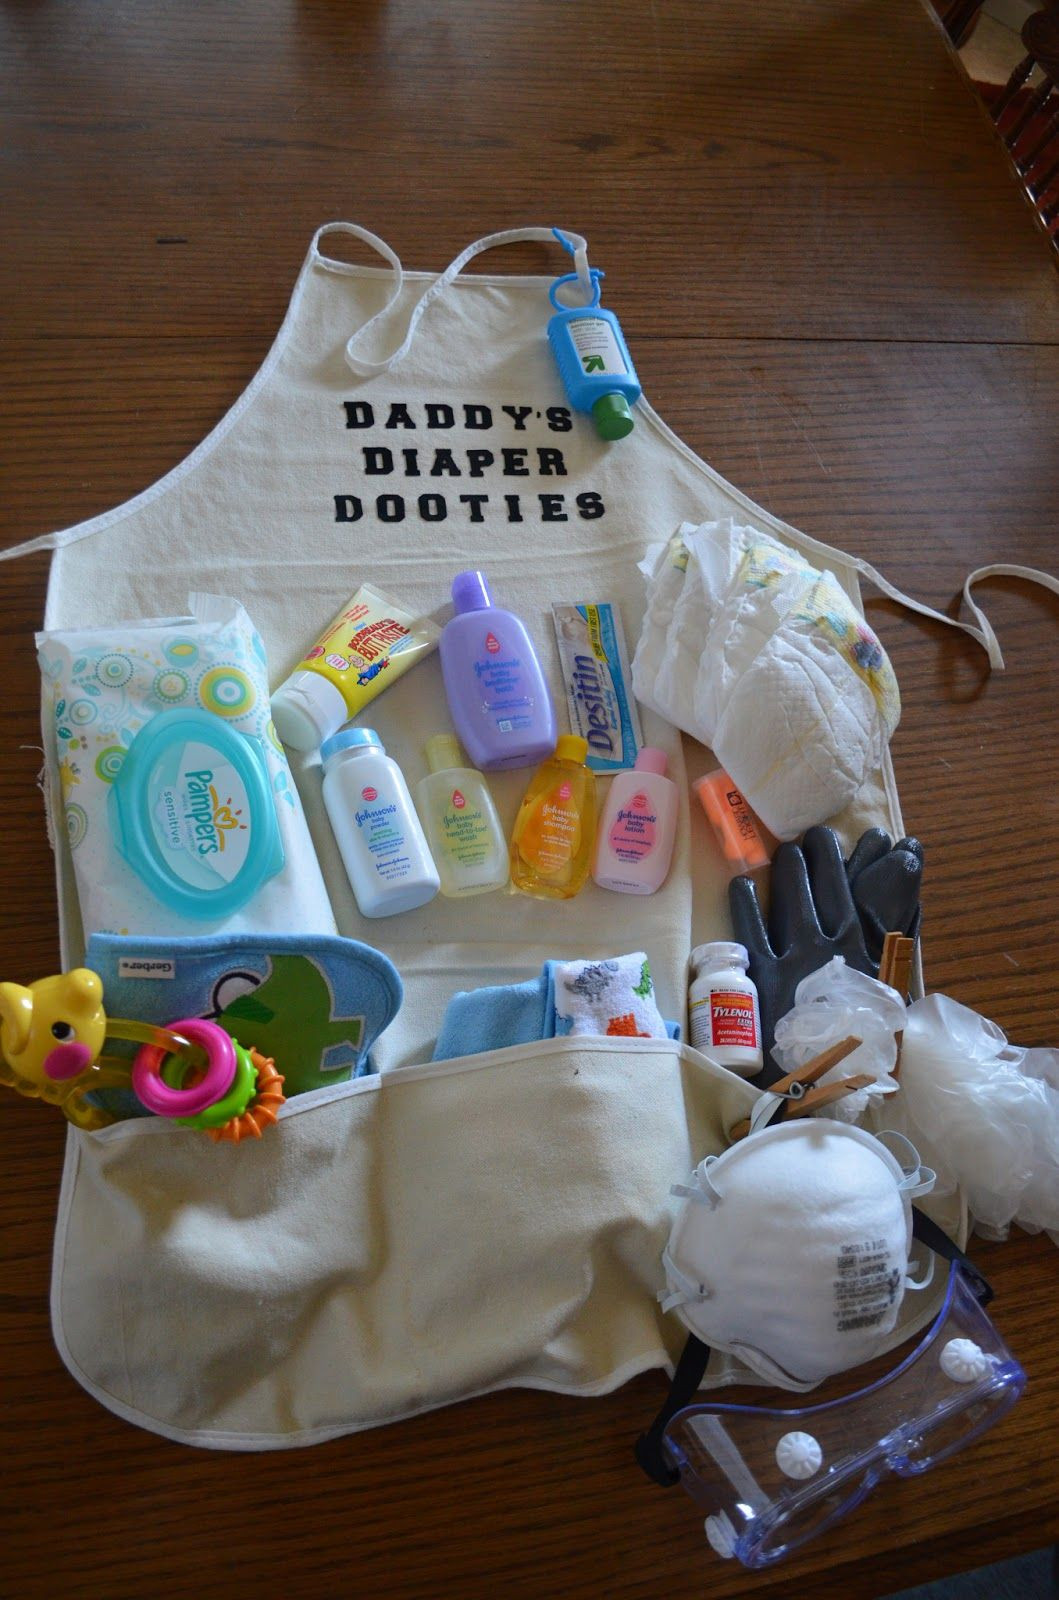 Diaper Baby Shower Gift Ideas
 A diaper apron t Cute for first time dads